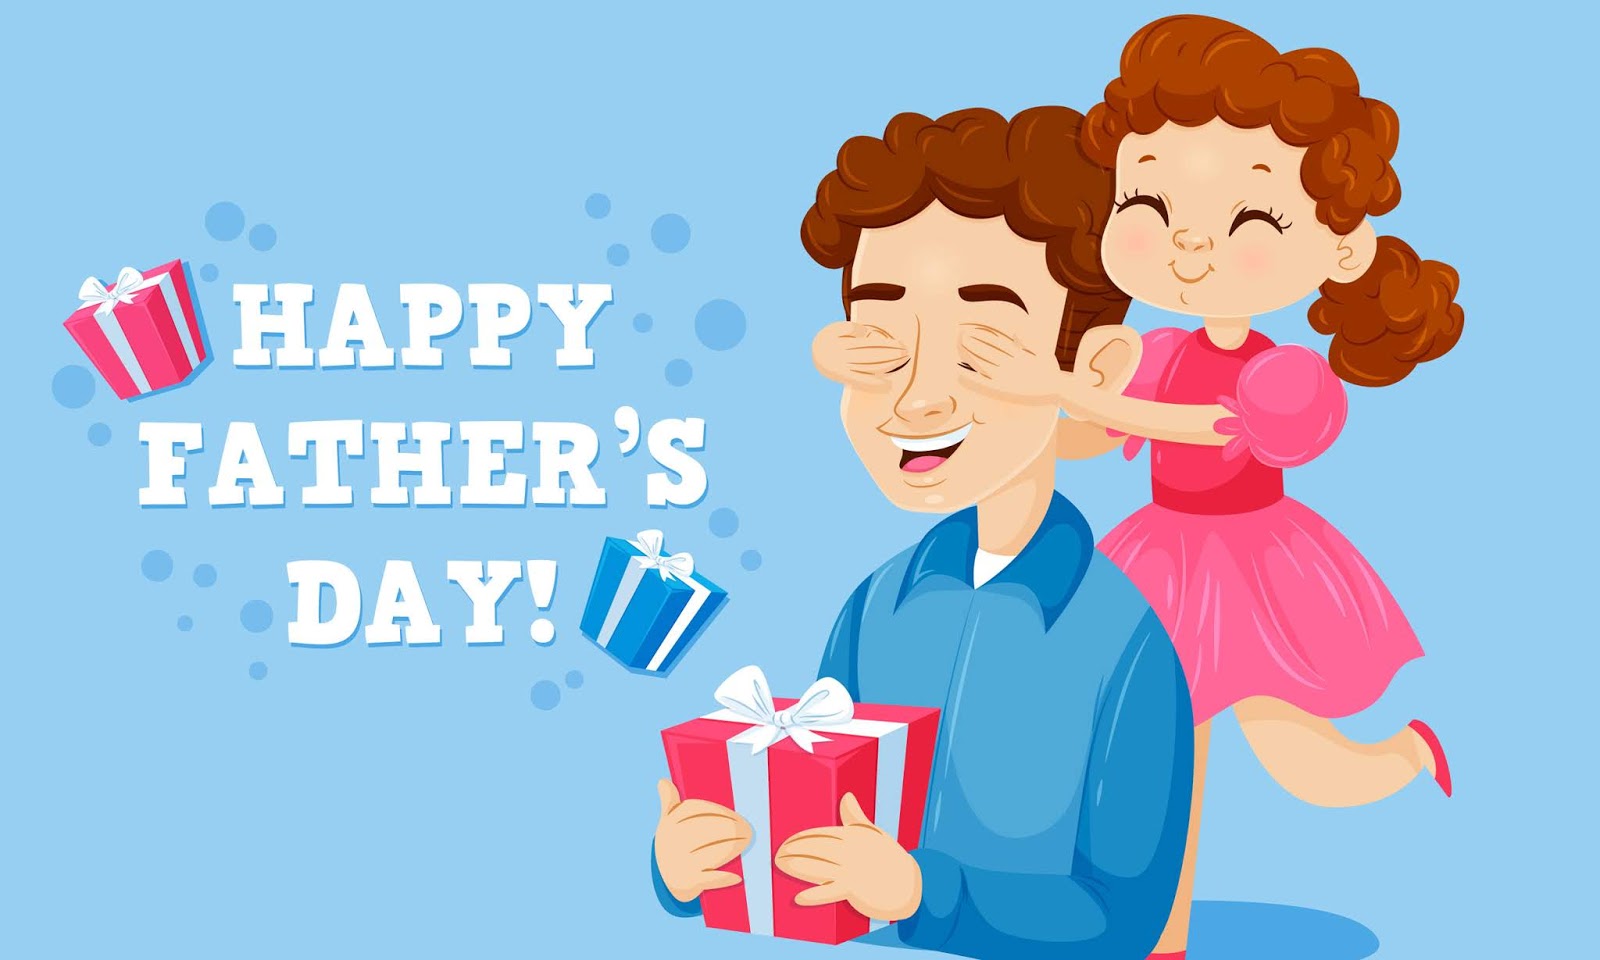 Happy Fathers Day Wallpapers.